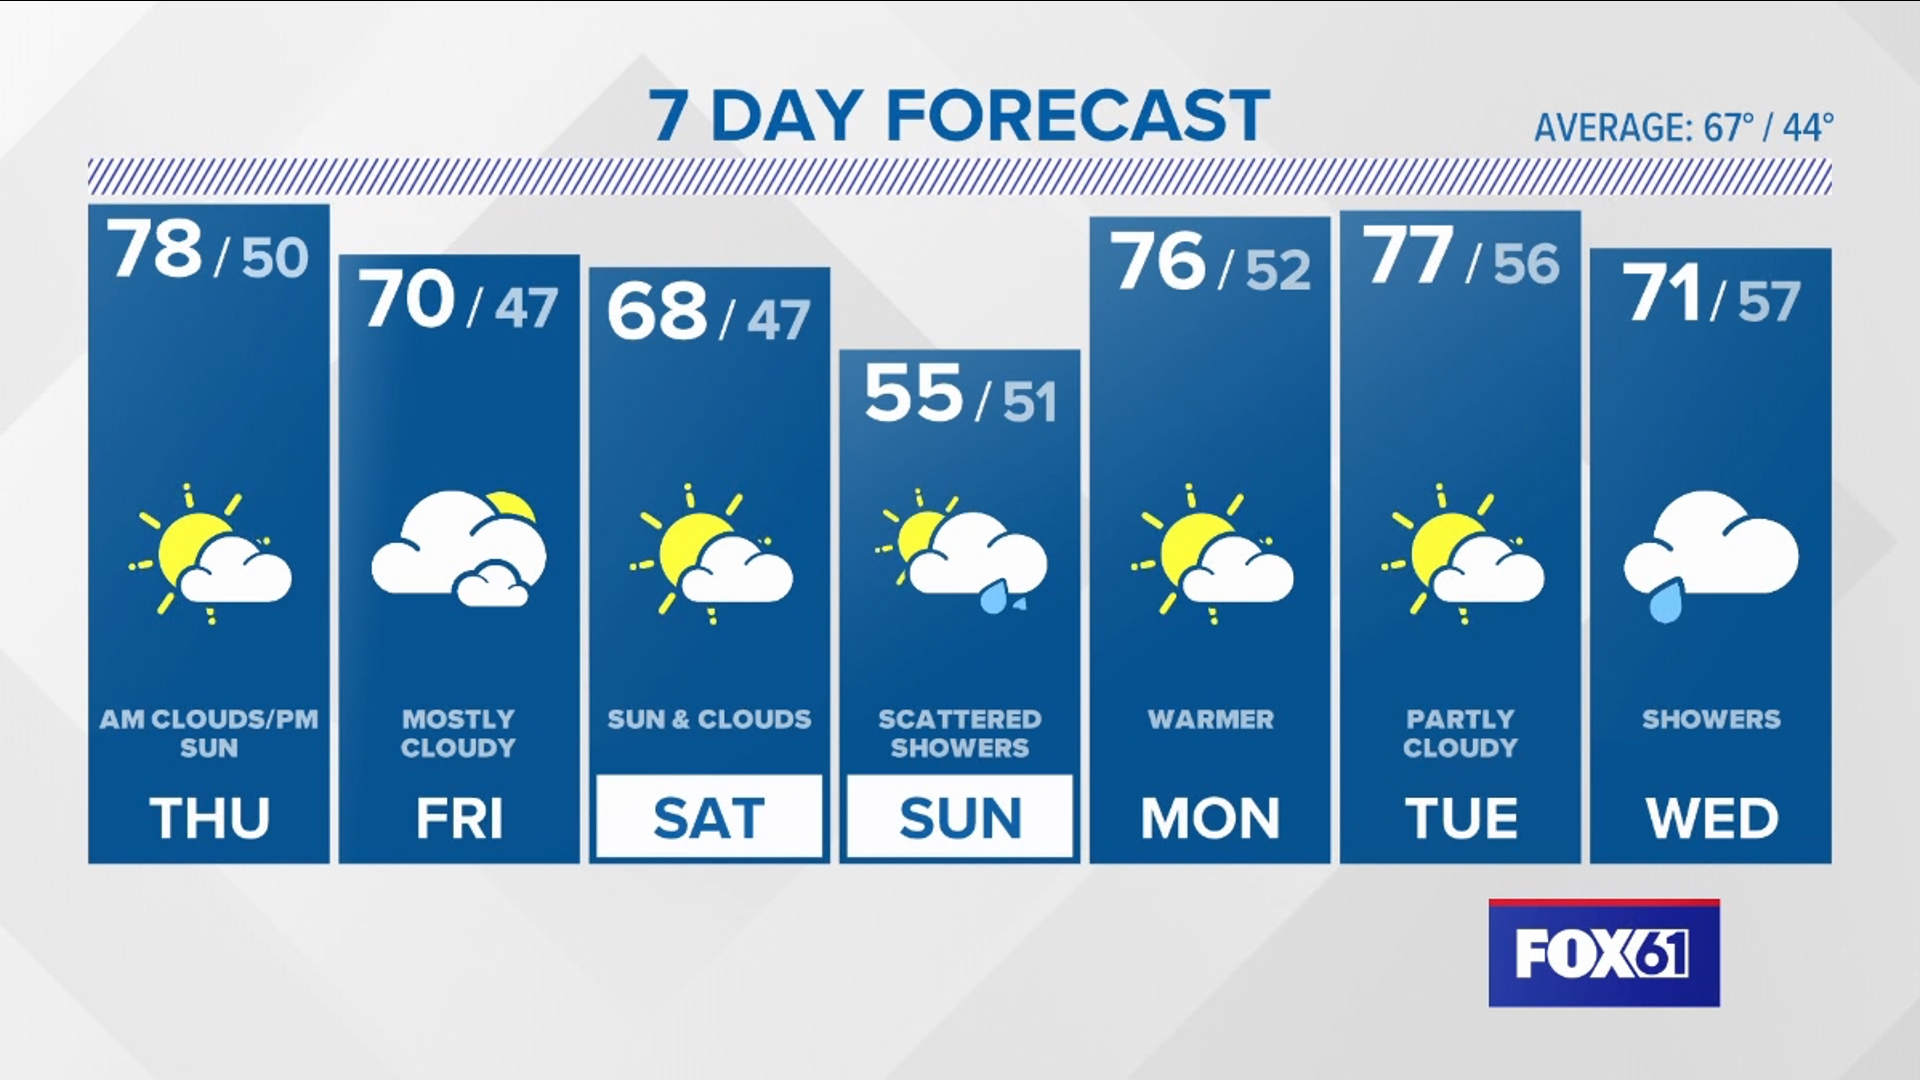 There will be a chance for some showers this weekend.